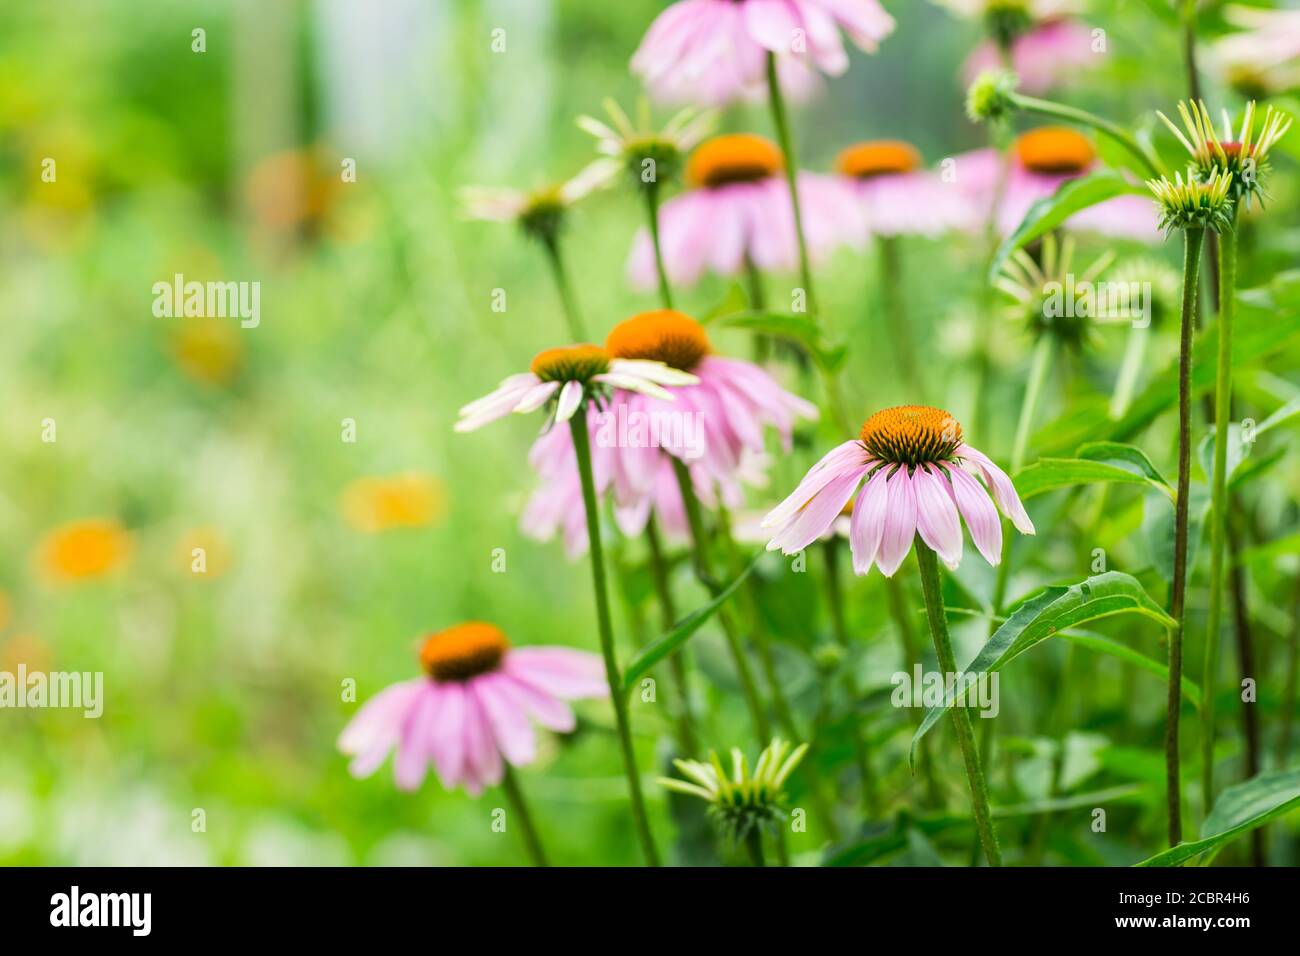 Echinacea purpurea in garden. Healing plant used for medical purposes in pharmaceutical industry. Stock Photo